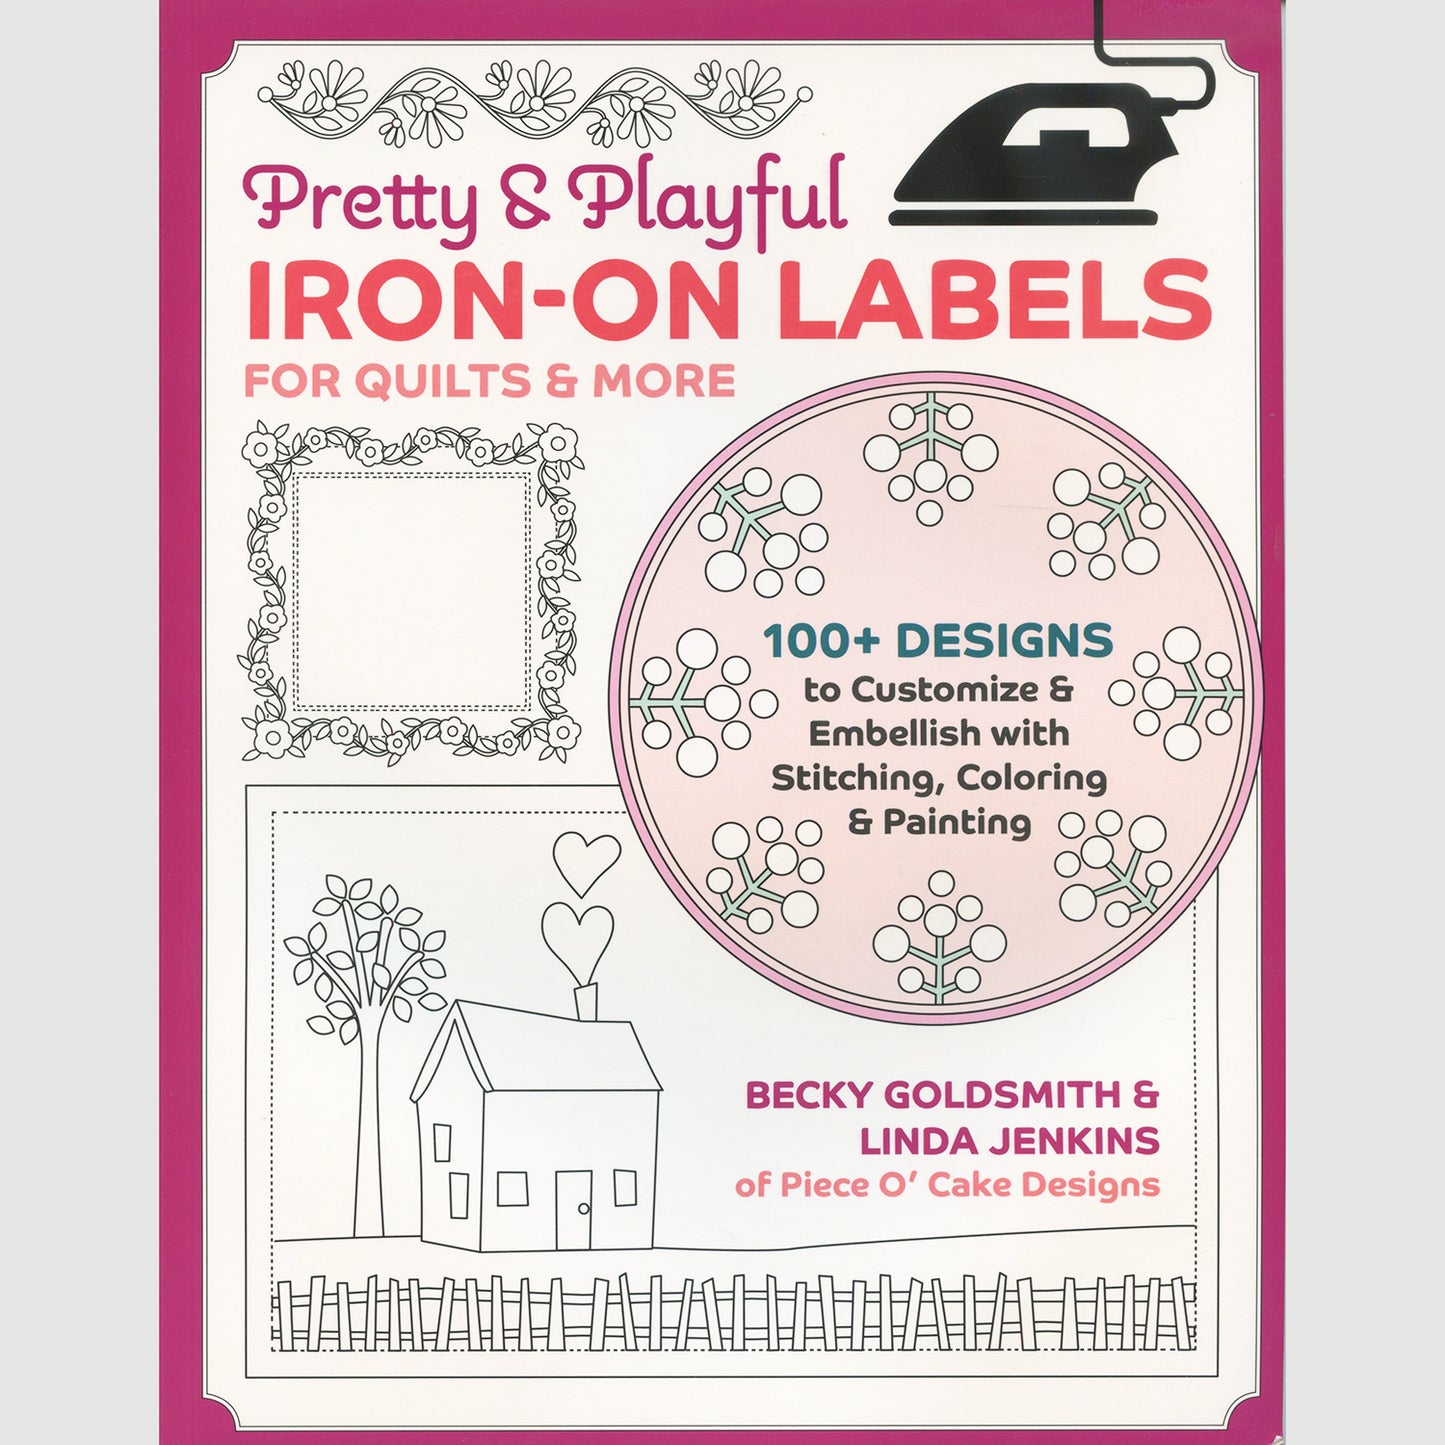 Pretty & Playful Iron-On Labels for Quilts & More Book Primary Image